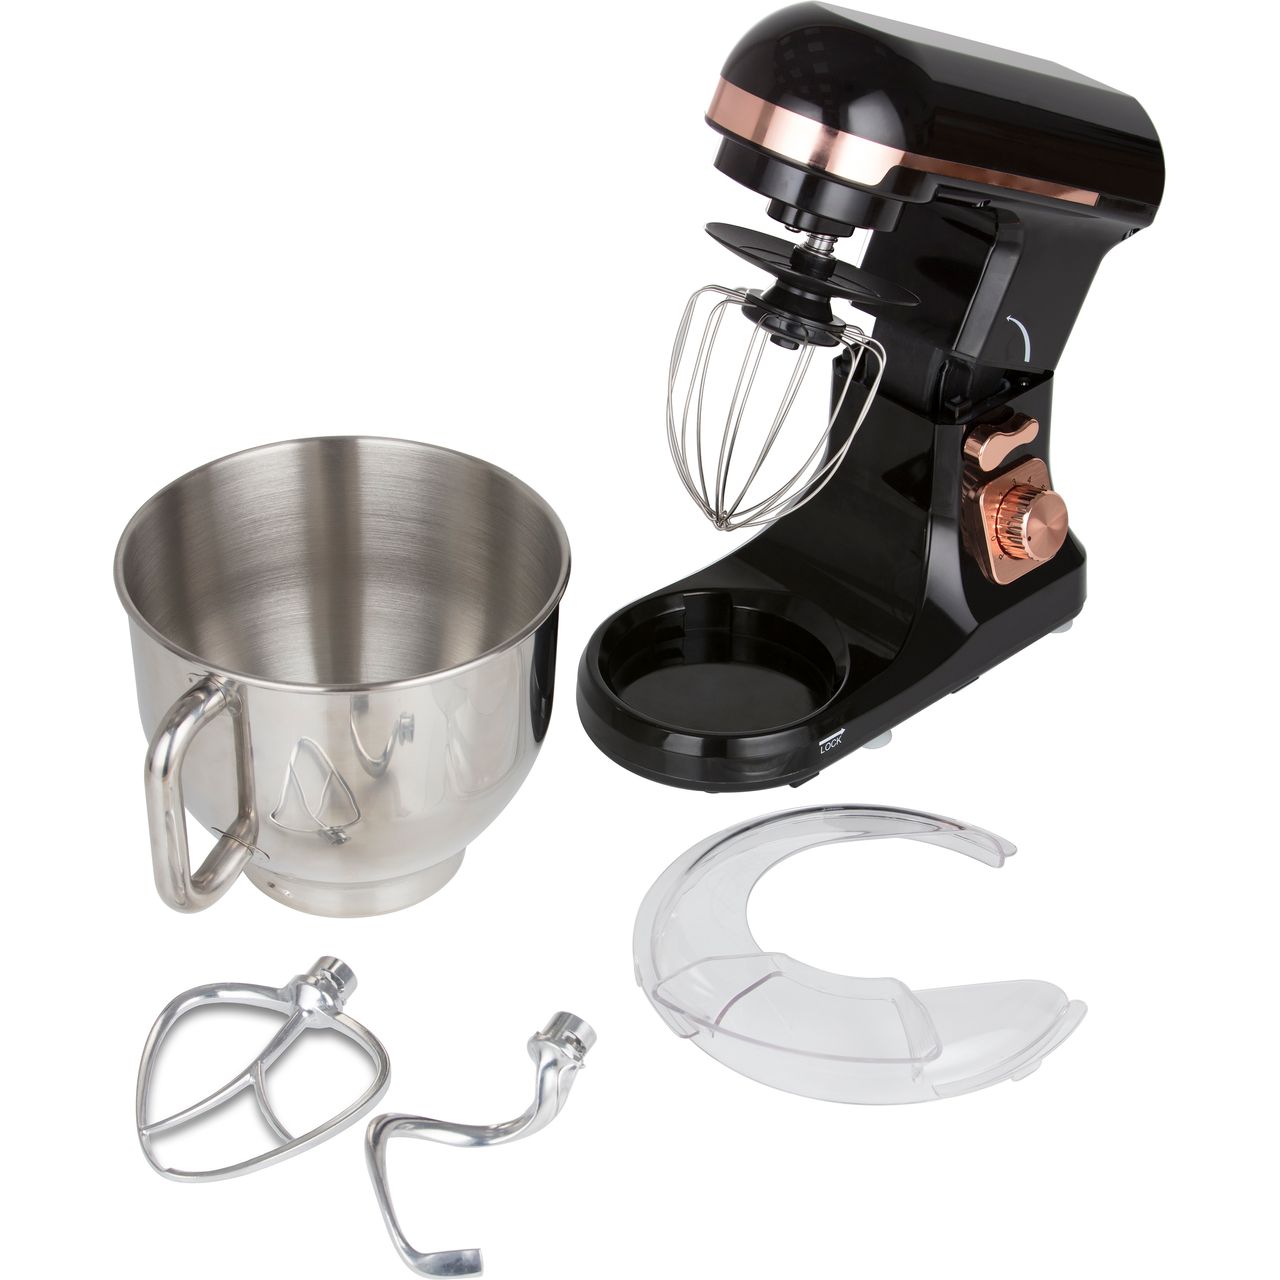 Tower T12033RG Stand Mixer with 5 Litre Bowl Review